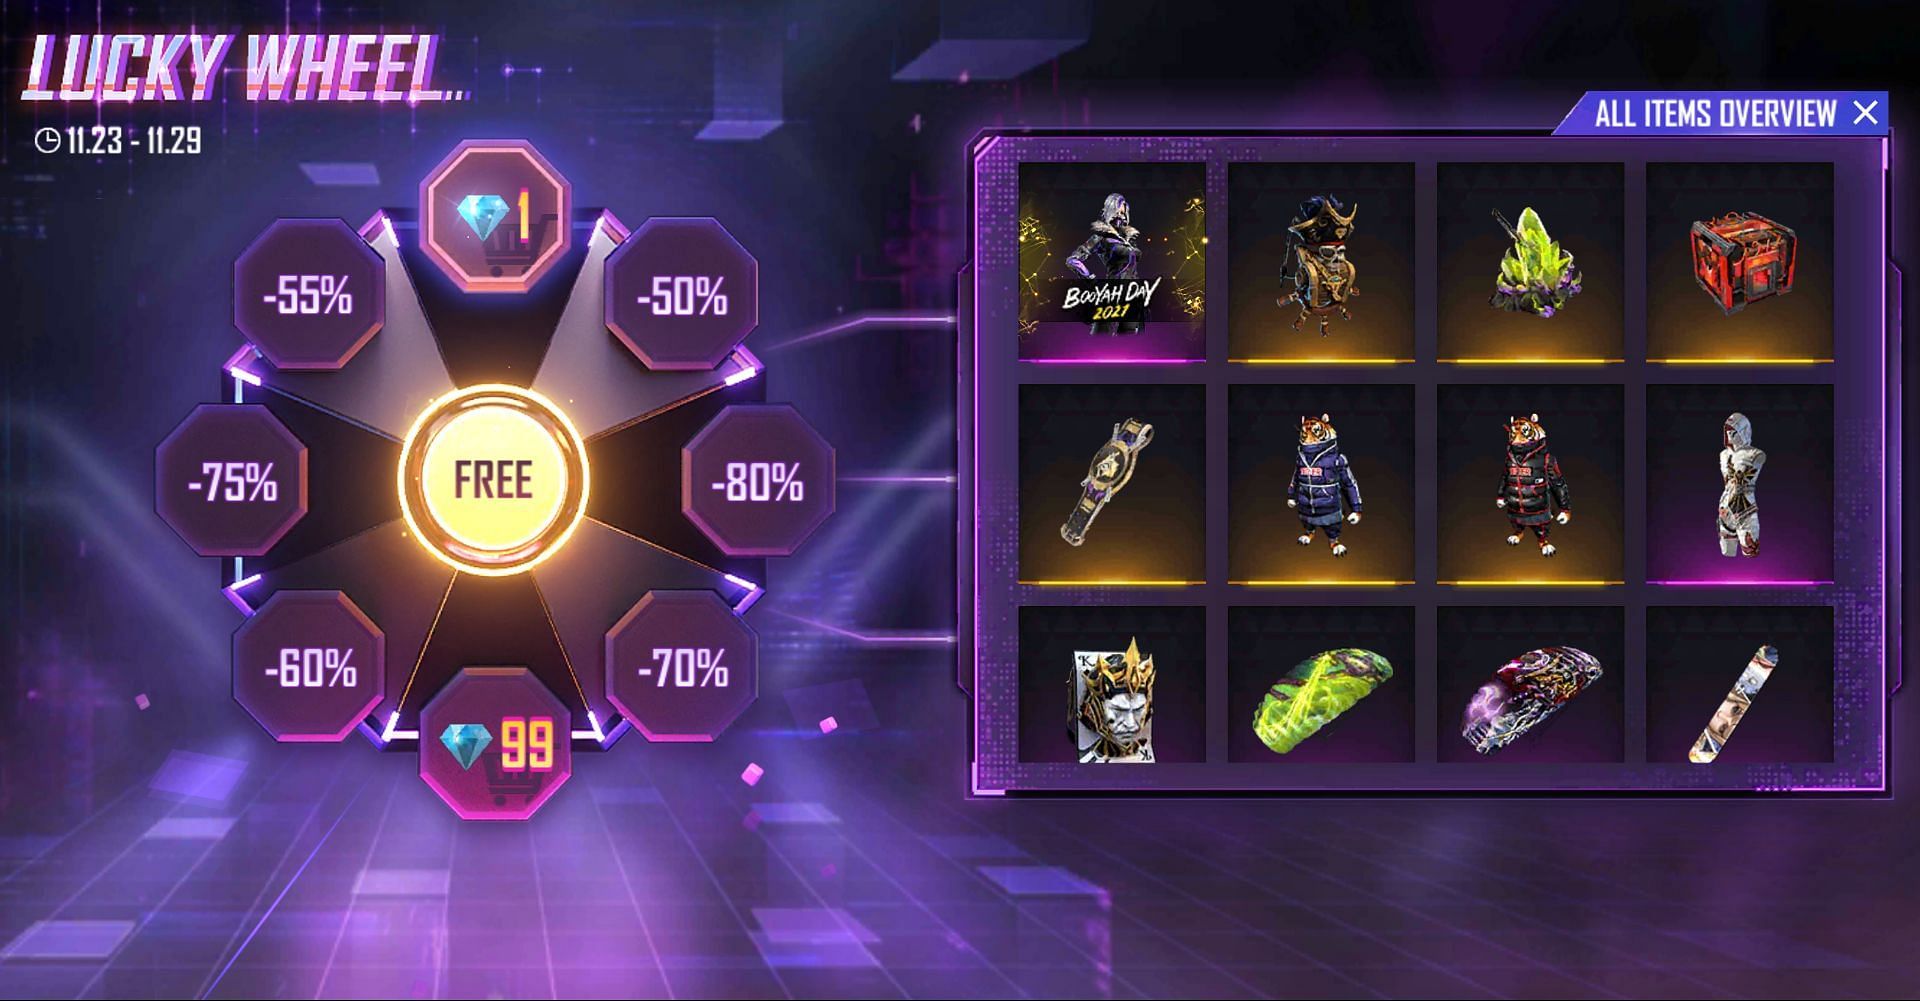 Lucky Wheel discount and items (Image via Free Fire)